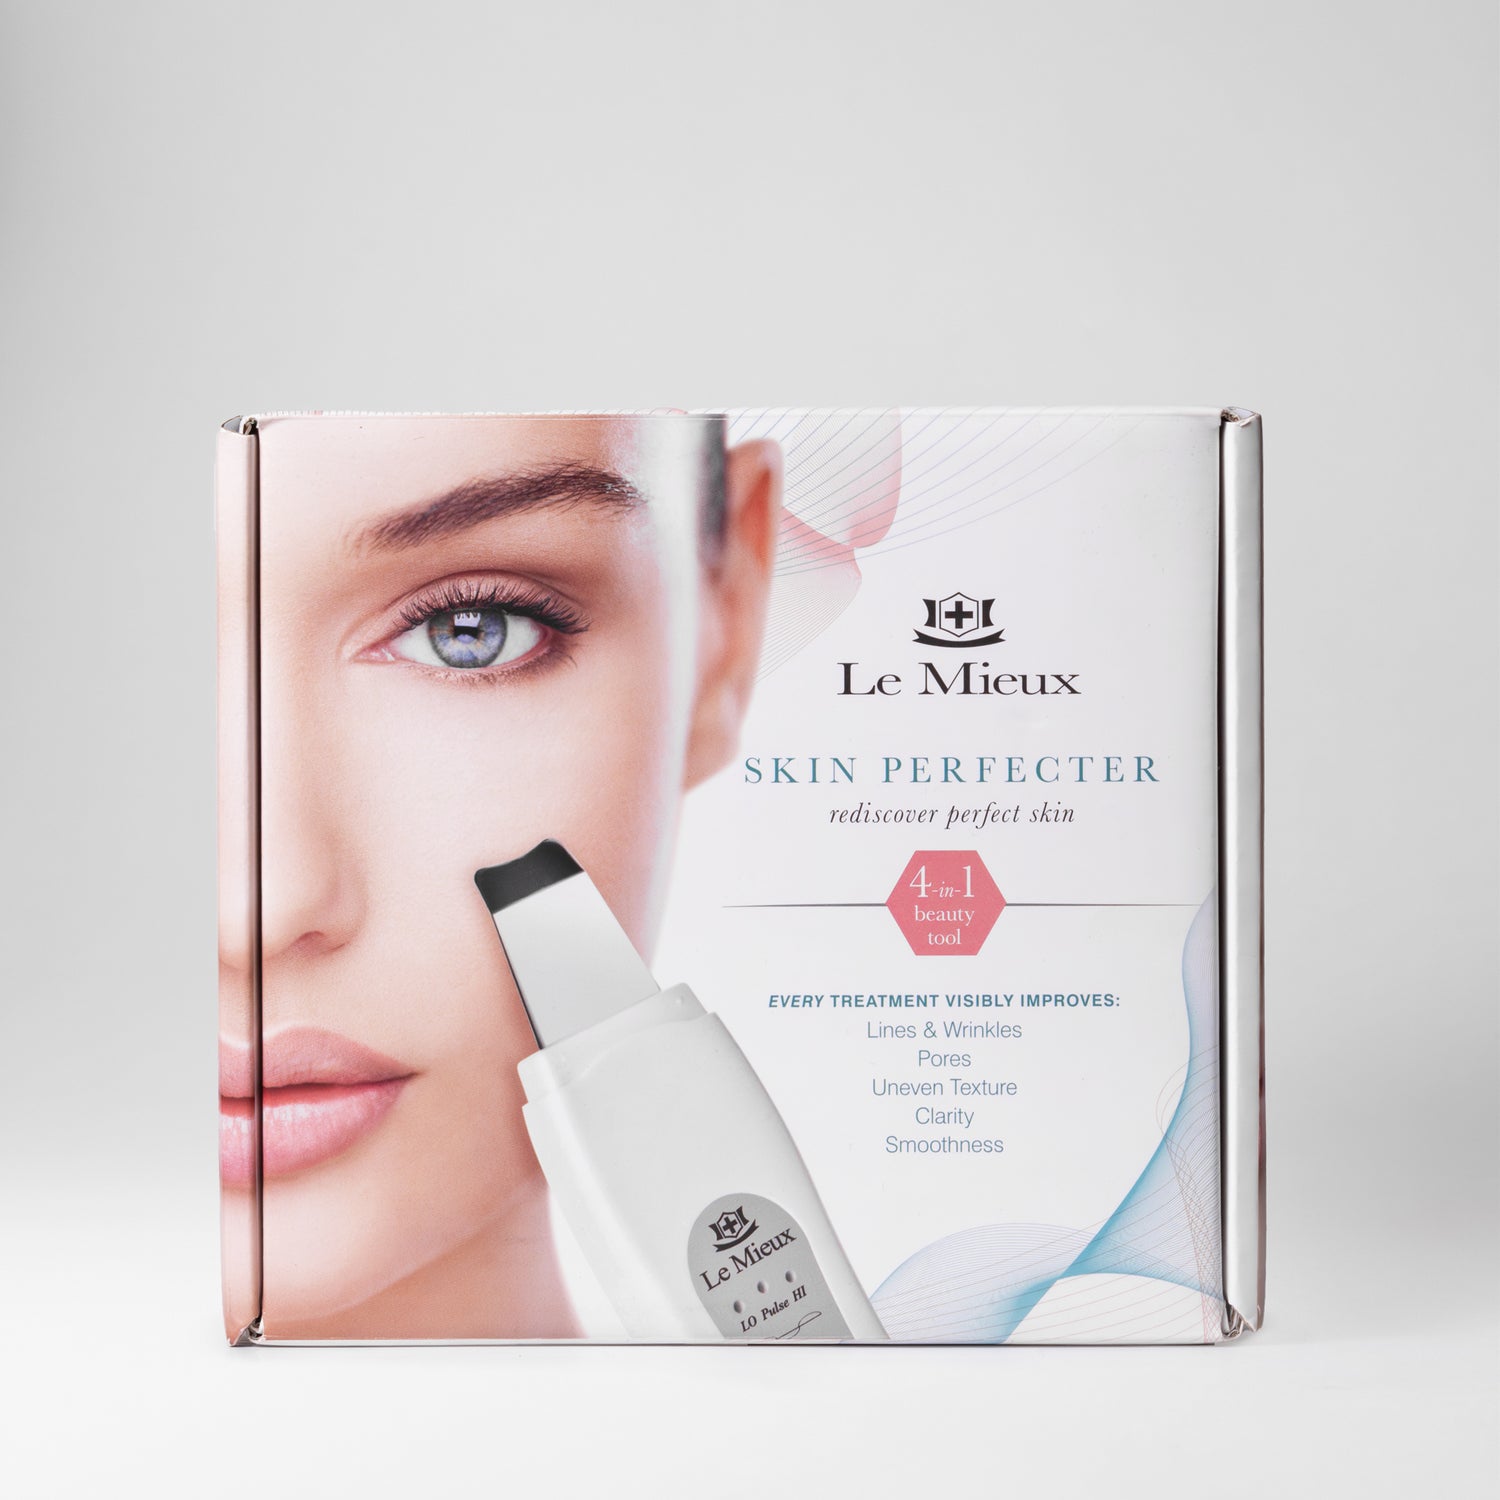  SKIN PERFECTER from Le Mieux Skincare - 2